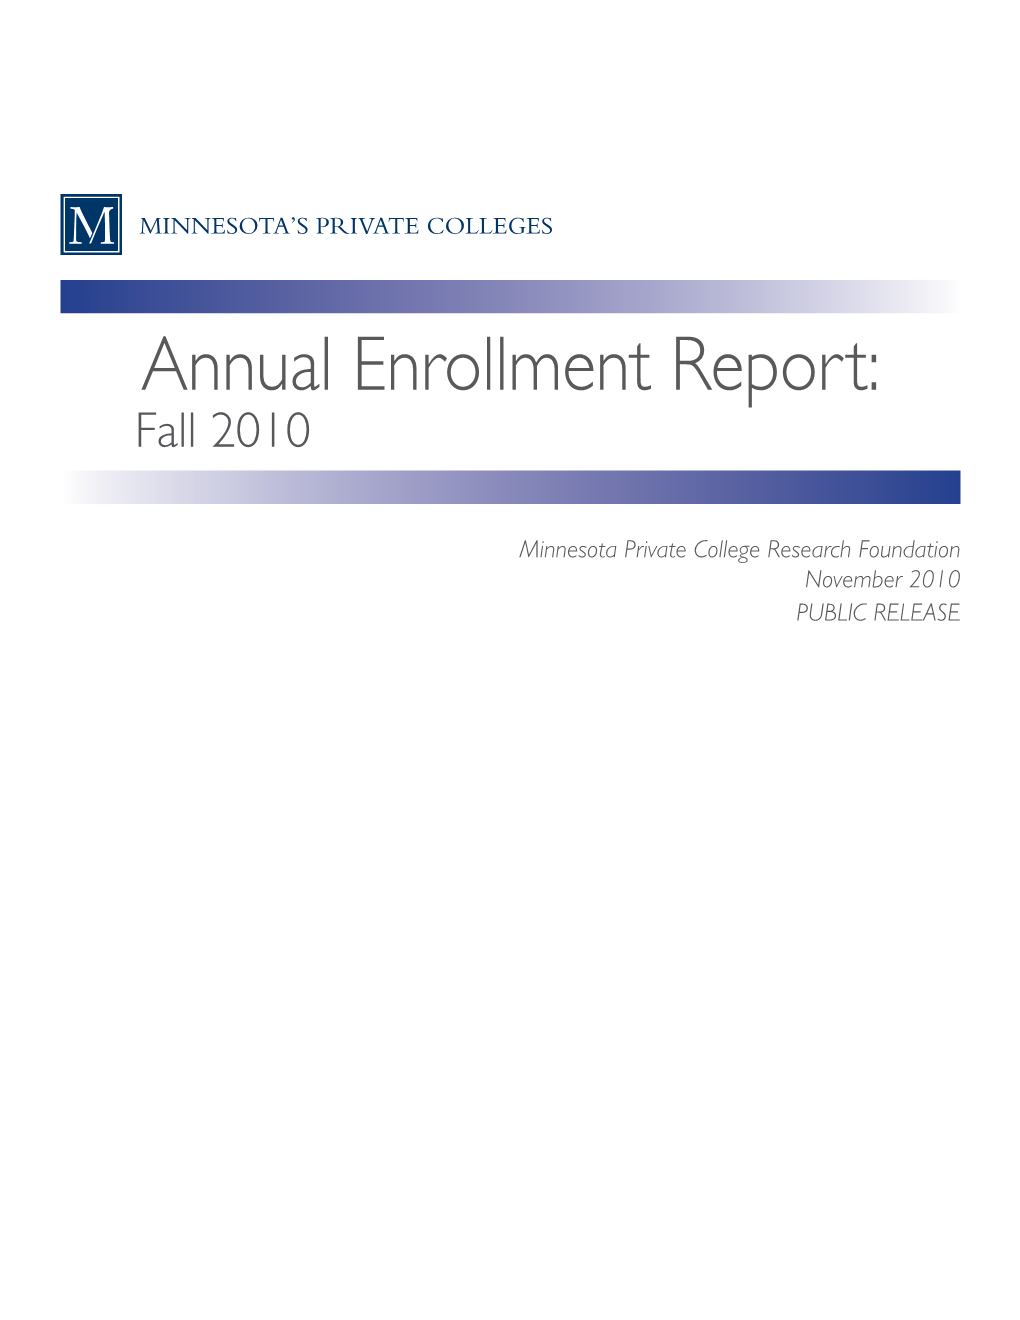 Minnesota's Private Colleges in Greater Numbers